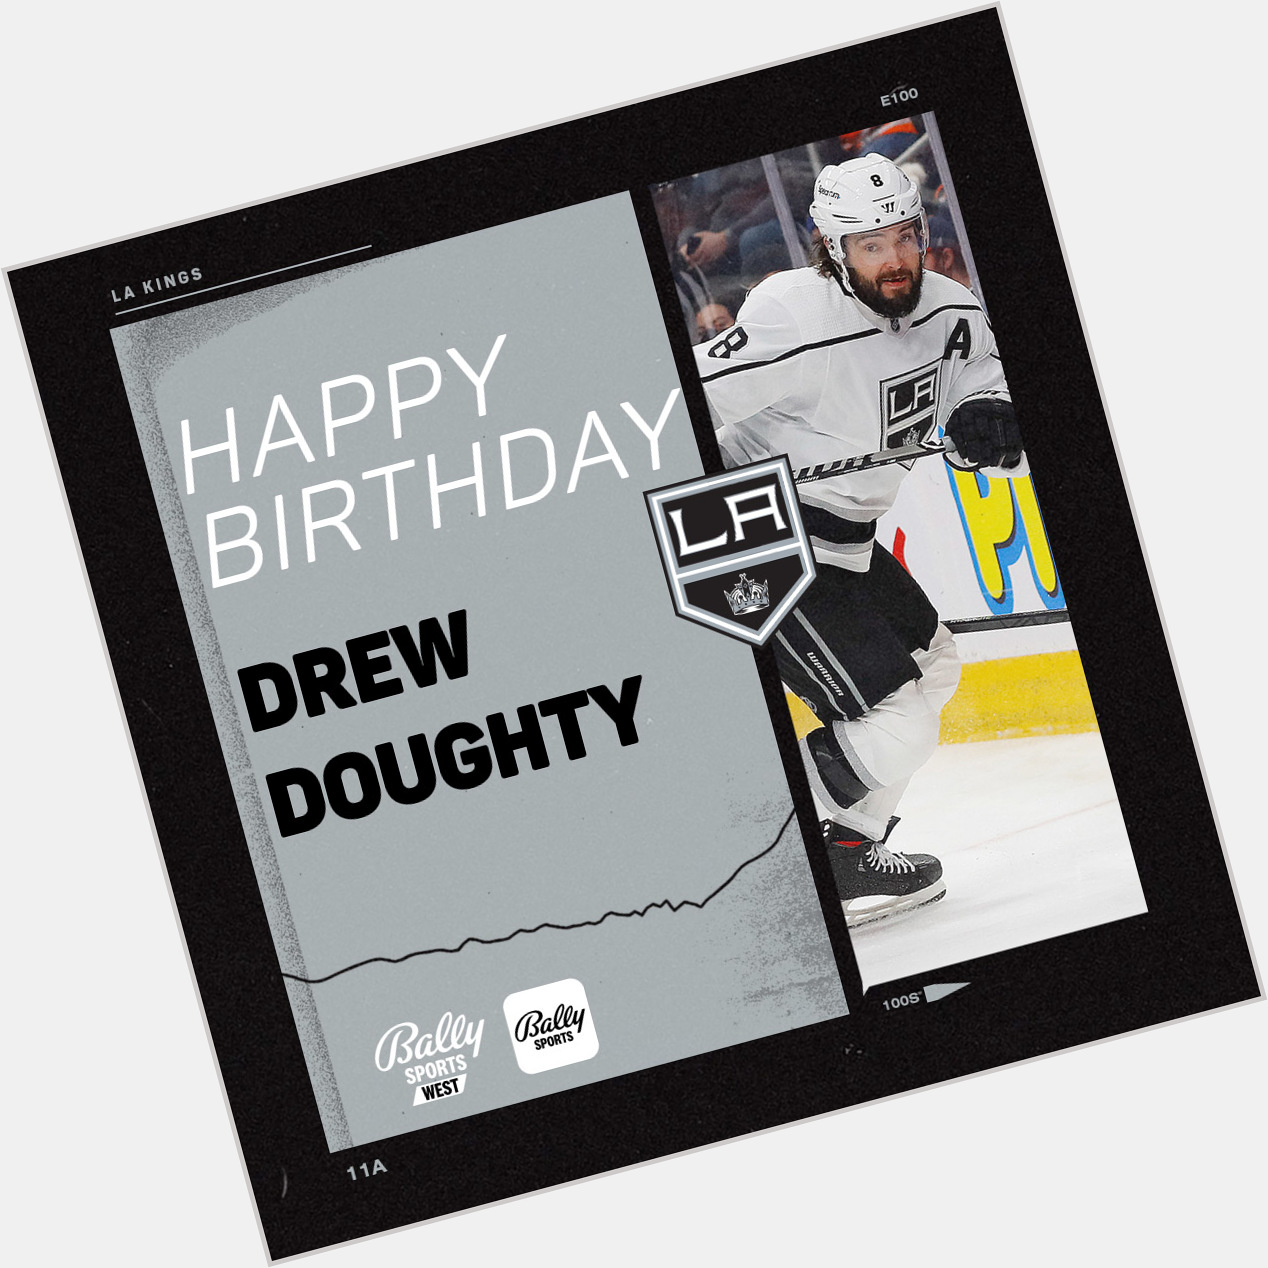 Join us in wishing Drew Doughty a happy 32nd birthday!!  